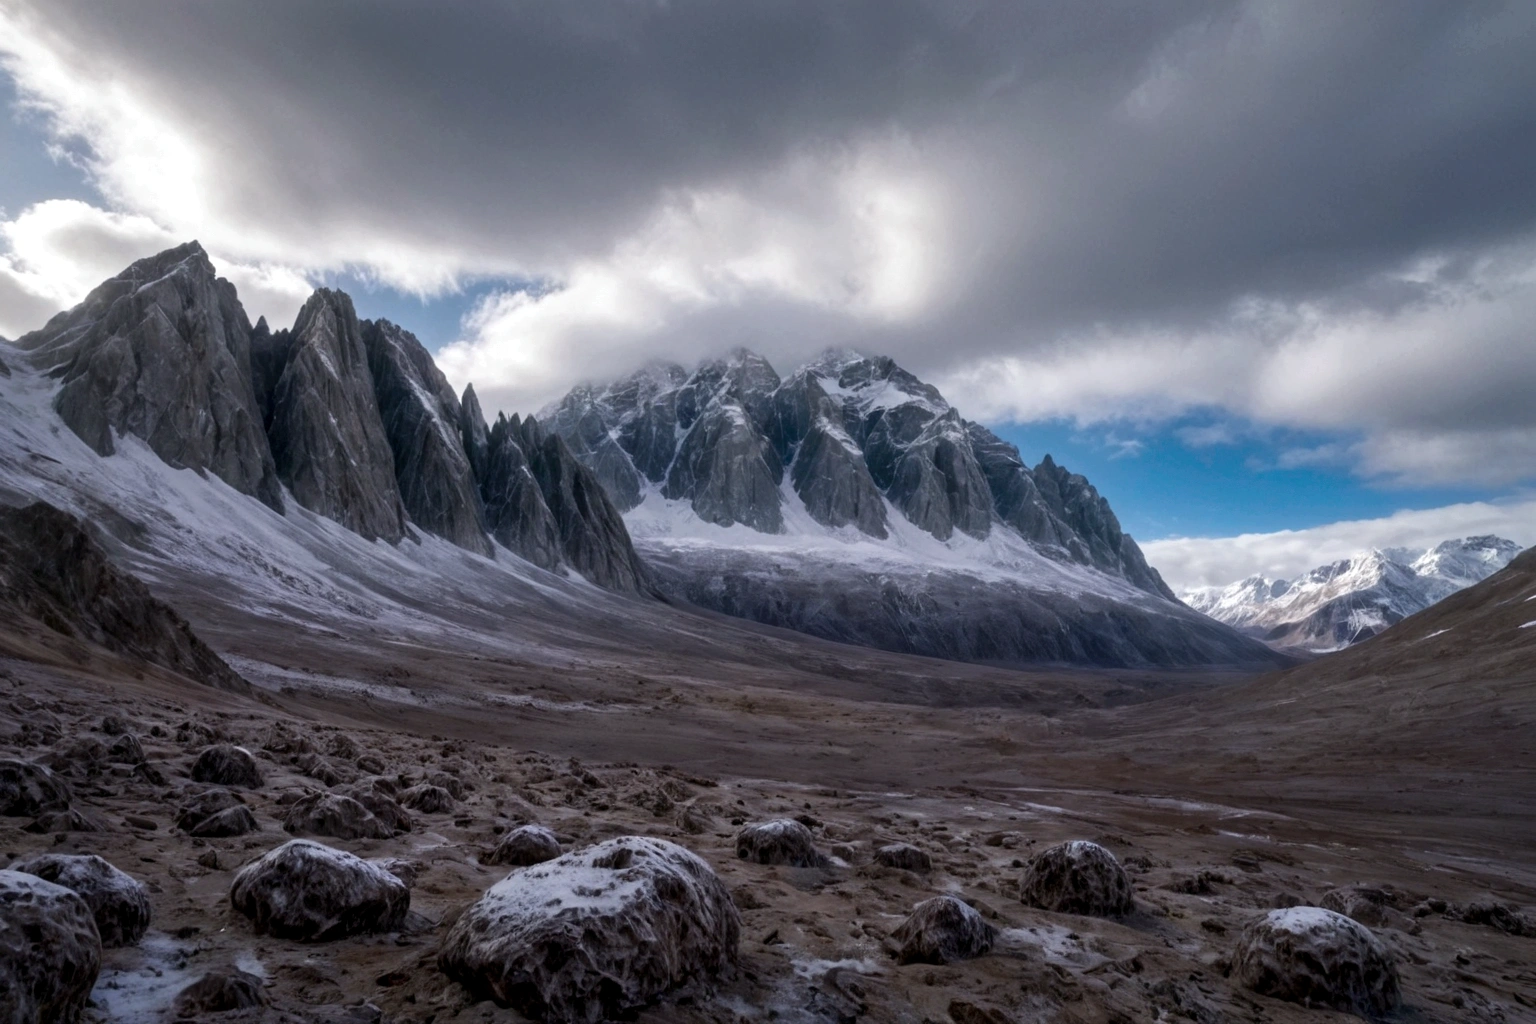 ON AN ALIEN PLANET STEEP AND INTRINSIC MOUNTAINS WITH SHARP ROCKS WITH SNOW AND ICE, EL CIELO TORMENTOSO APLOMADO, GRAY AND COLD HAS THE CLOUDS DESTROYED BY THE FREEZING WIND FROM THE POLE, IMAGEN HIPER REALISTA, MAXIMUM DEPTH OF FIELD, MAXIMUM HDR 4K RESOLUTION, PERSPECTIVA PERFECTA PARA fortaleza alien
